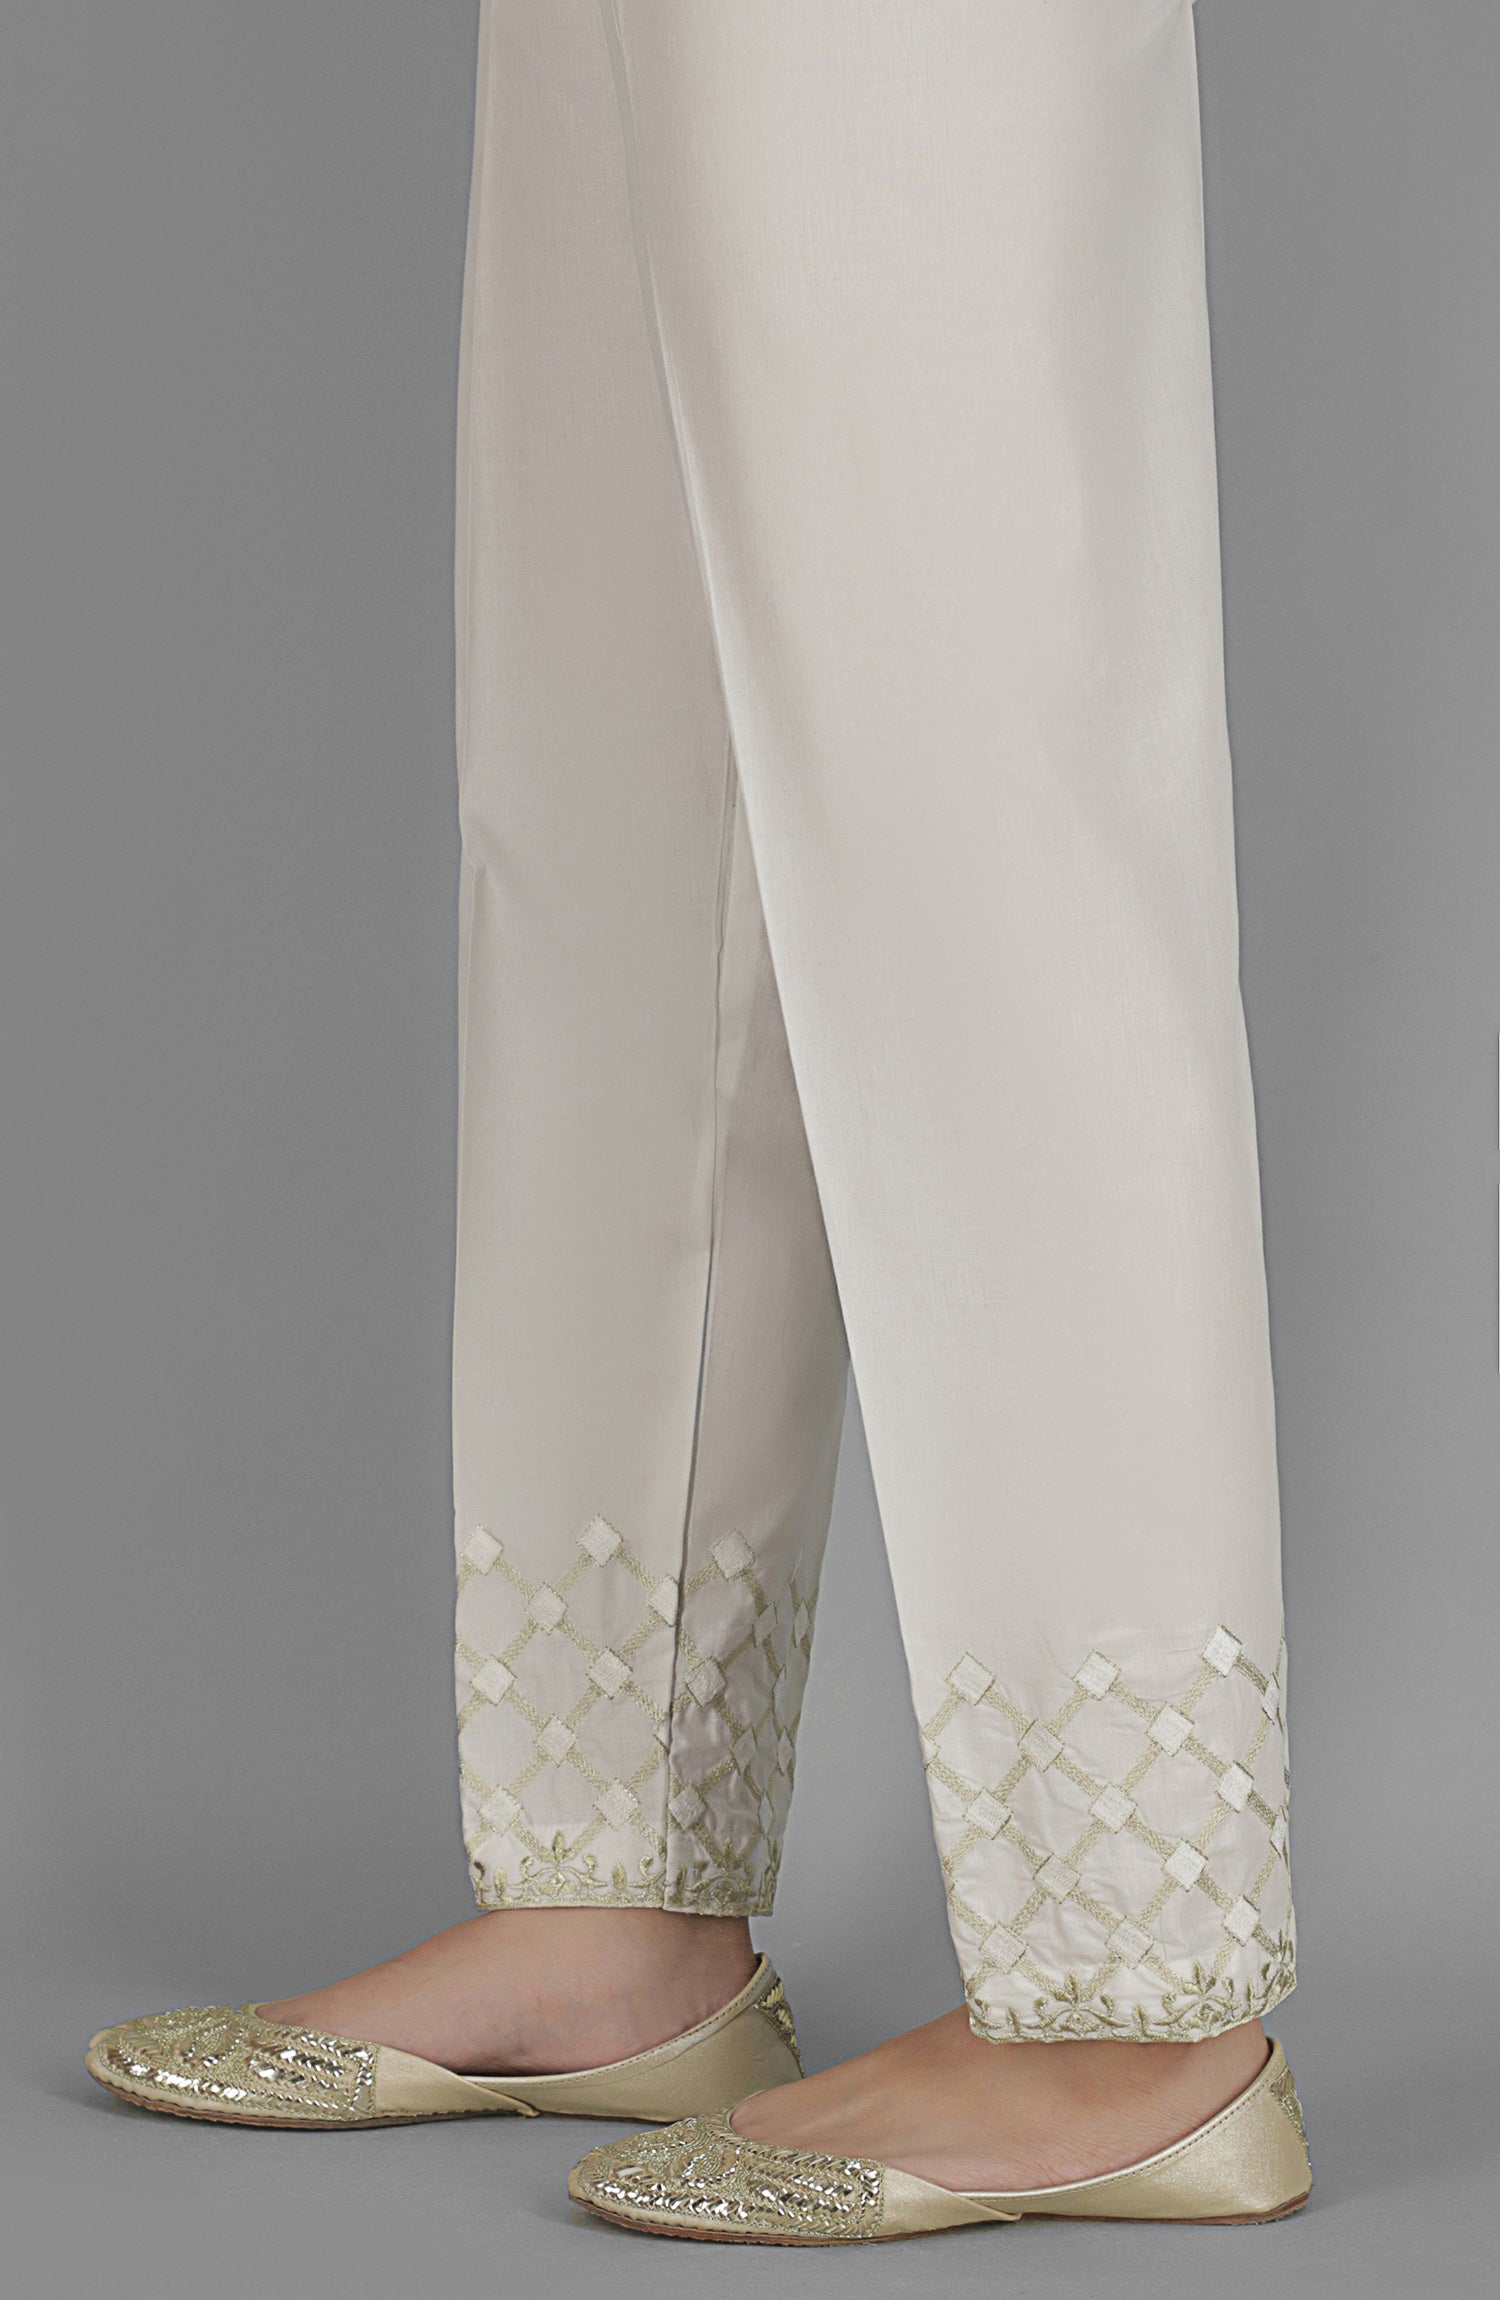 NRPE-056/S WHITE CAMBRIC SCPANTS STITCHED BOTTOMS PANTS